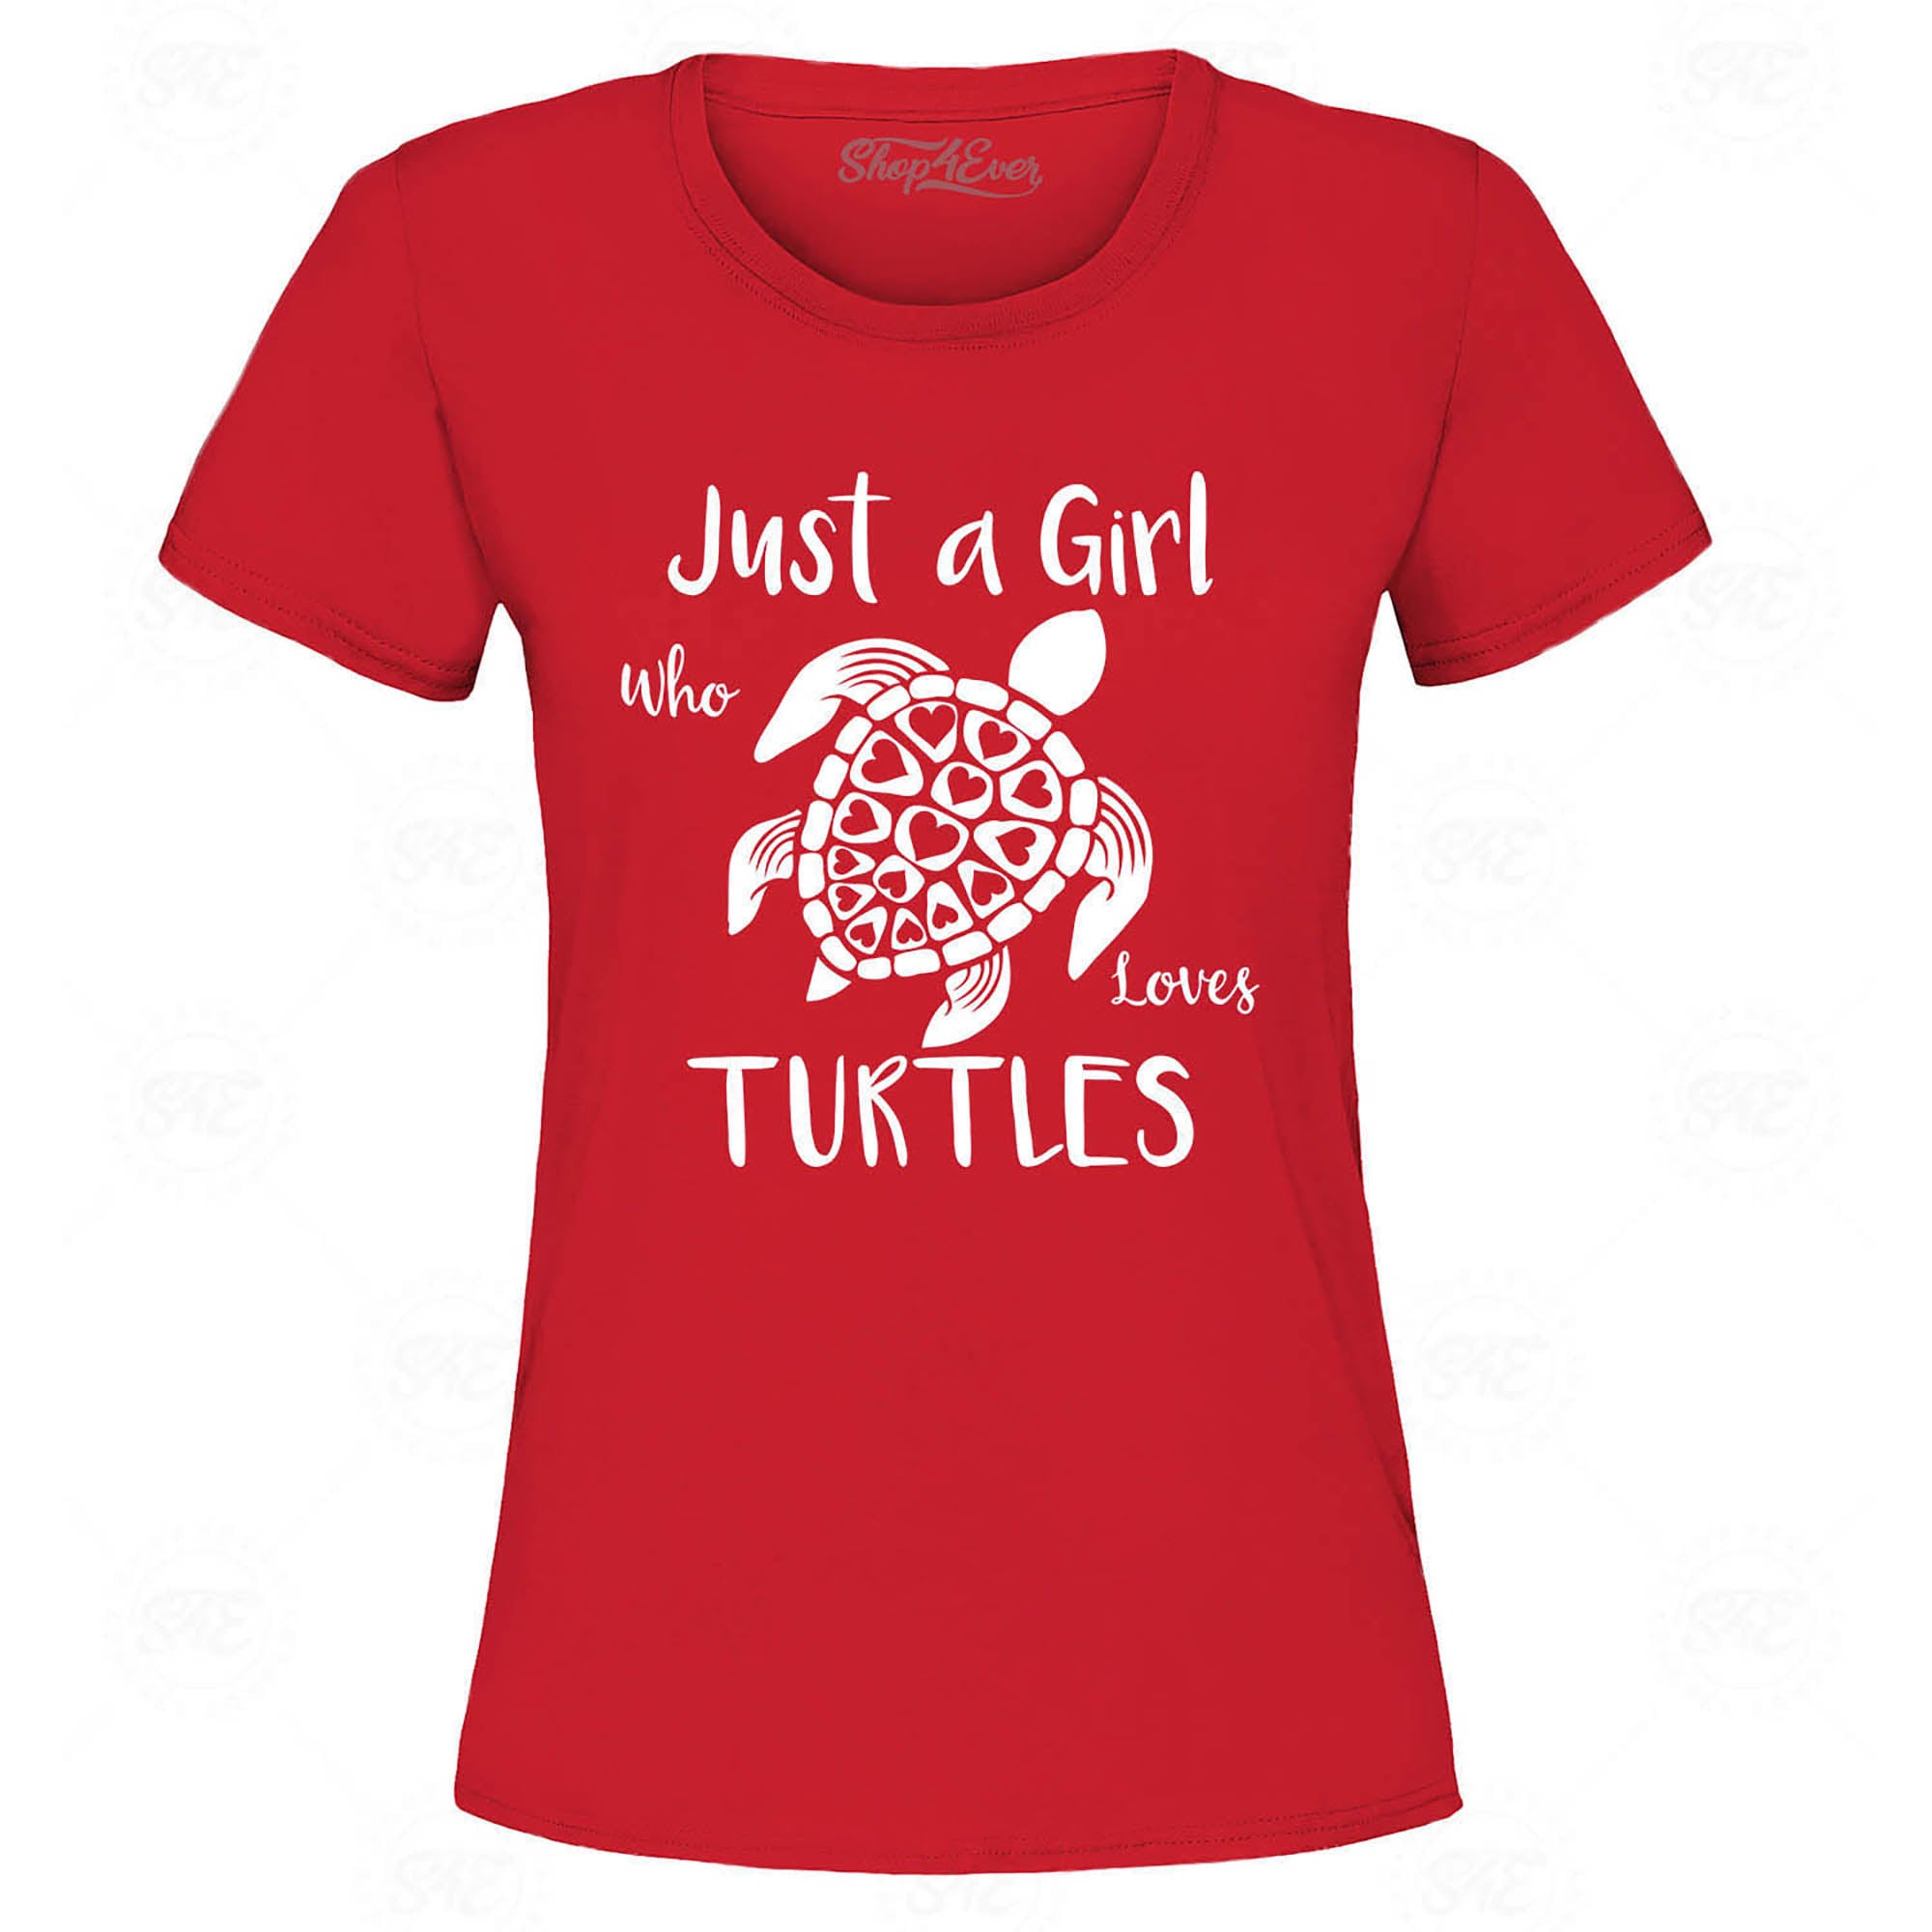 Just A Girl Who Loves Turtles Women's T-Shirt